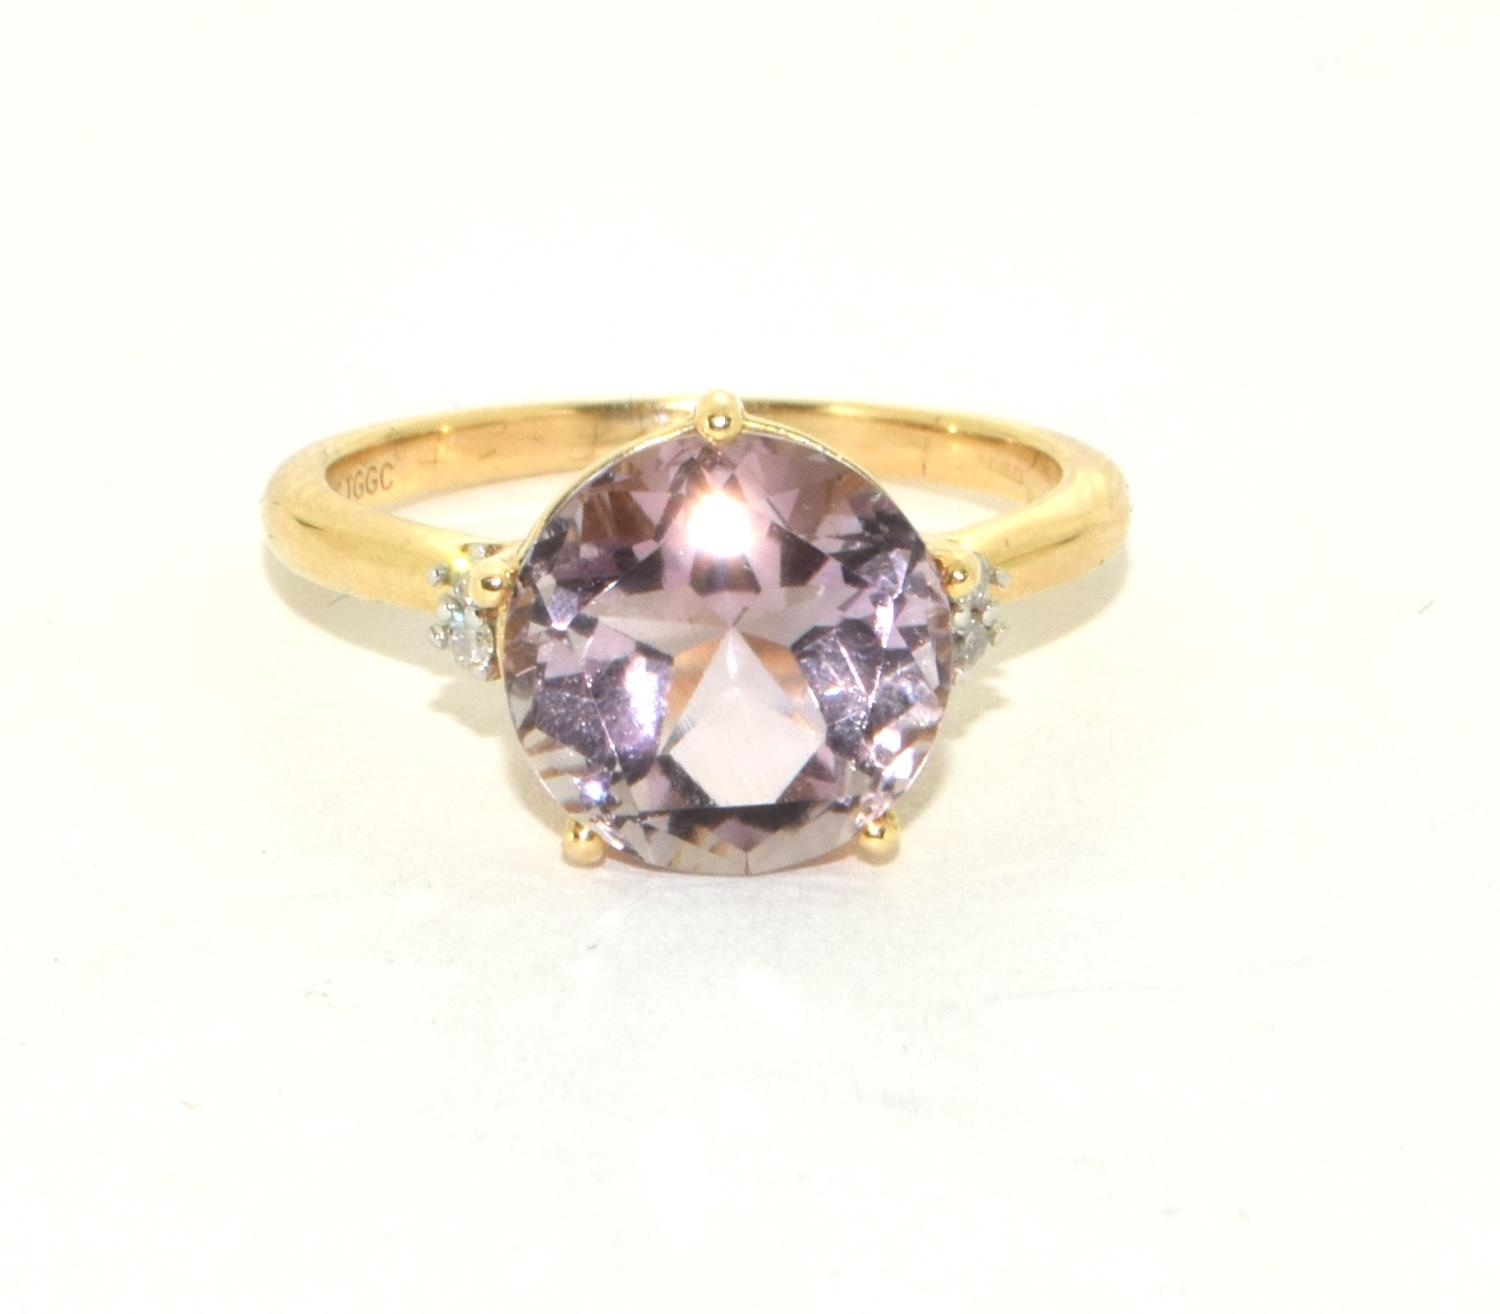 9ct gold ladies Large Amethyst solitaire with of set Diamond ring size N